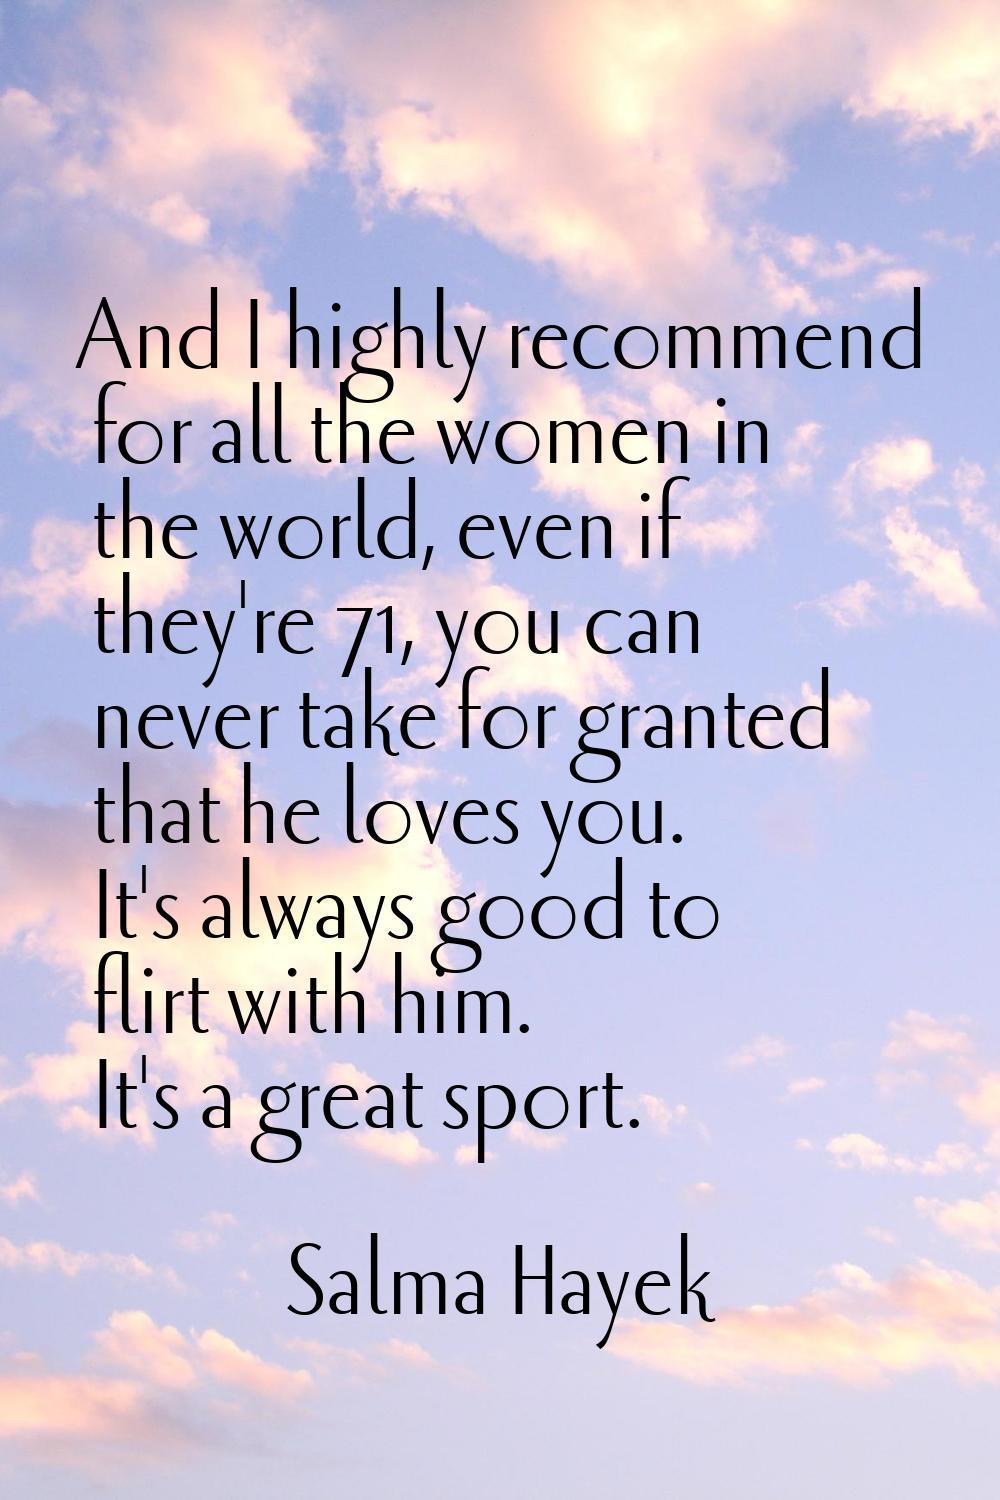 And I highly recommend for all the women in the world, even if they're 71, you can never take for g